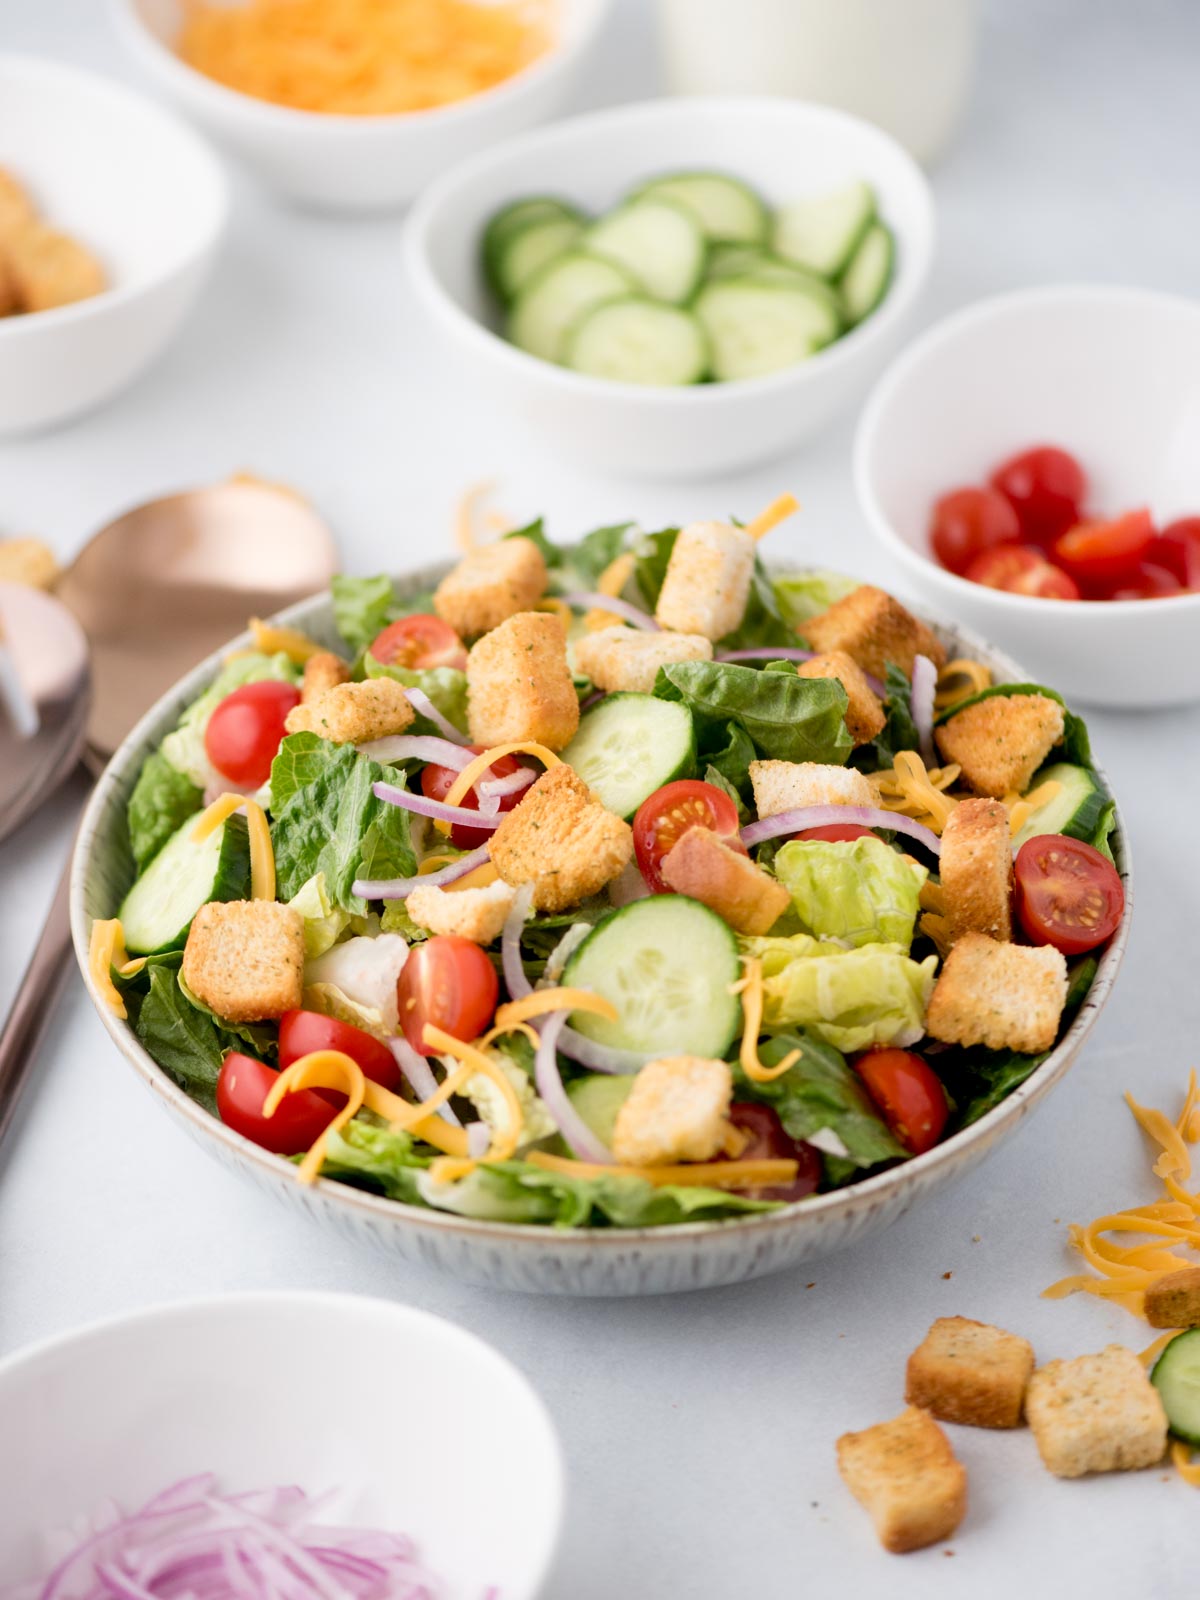 house salad in a bowl surrounded by servings utensils and toppings